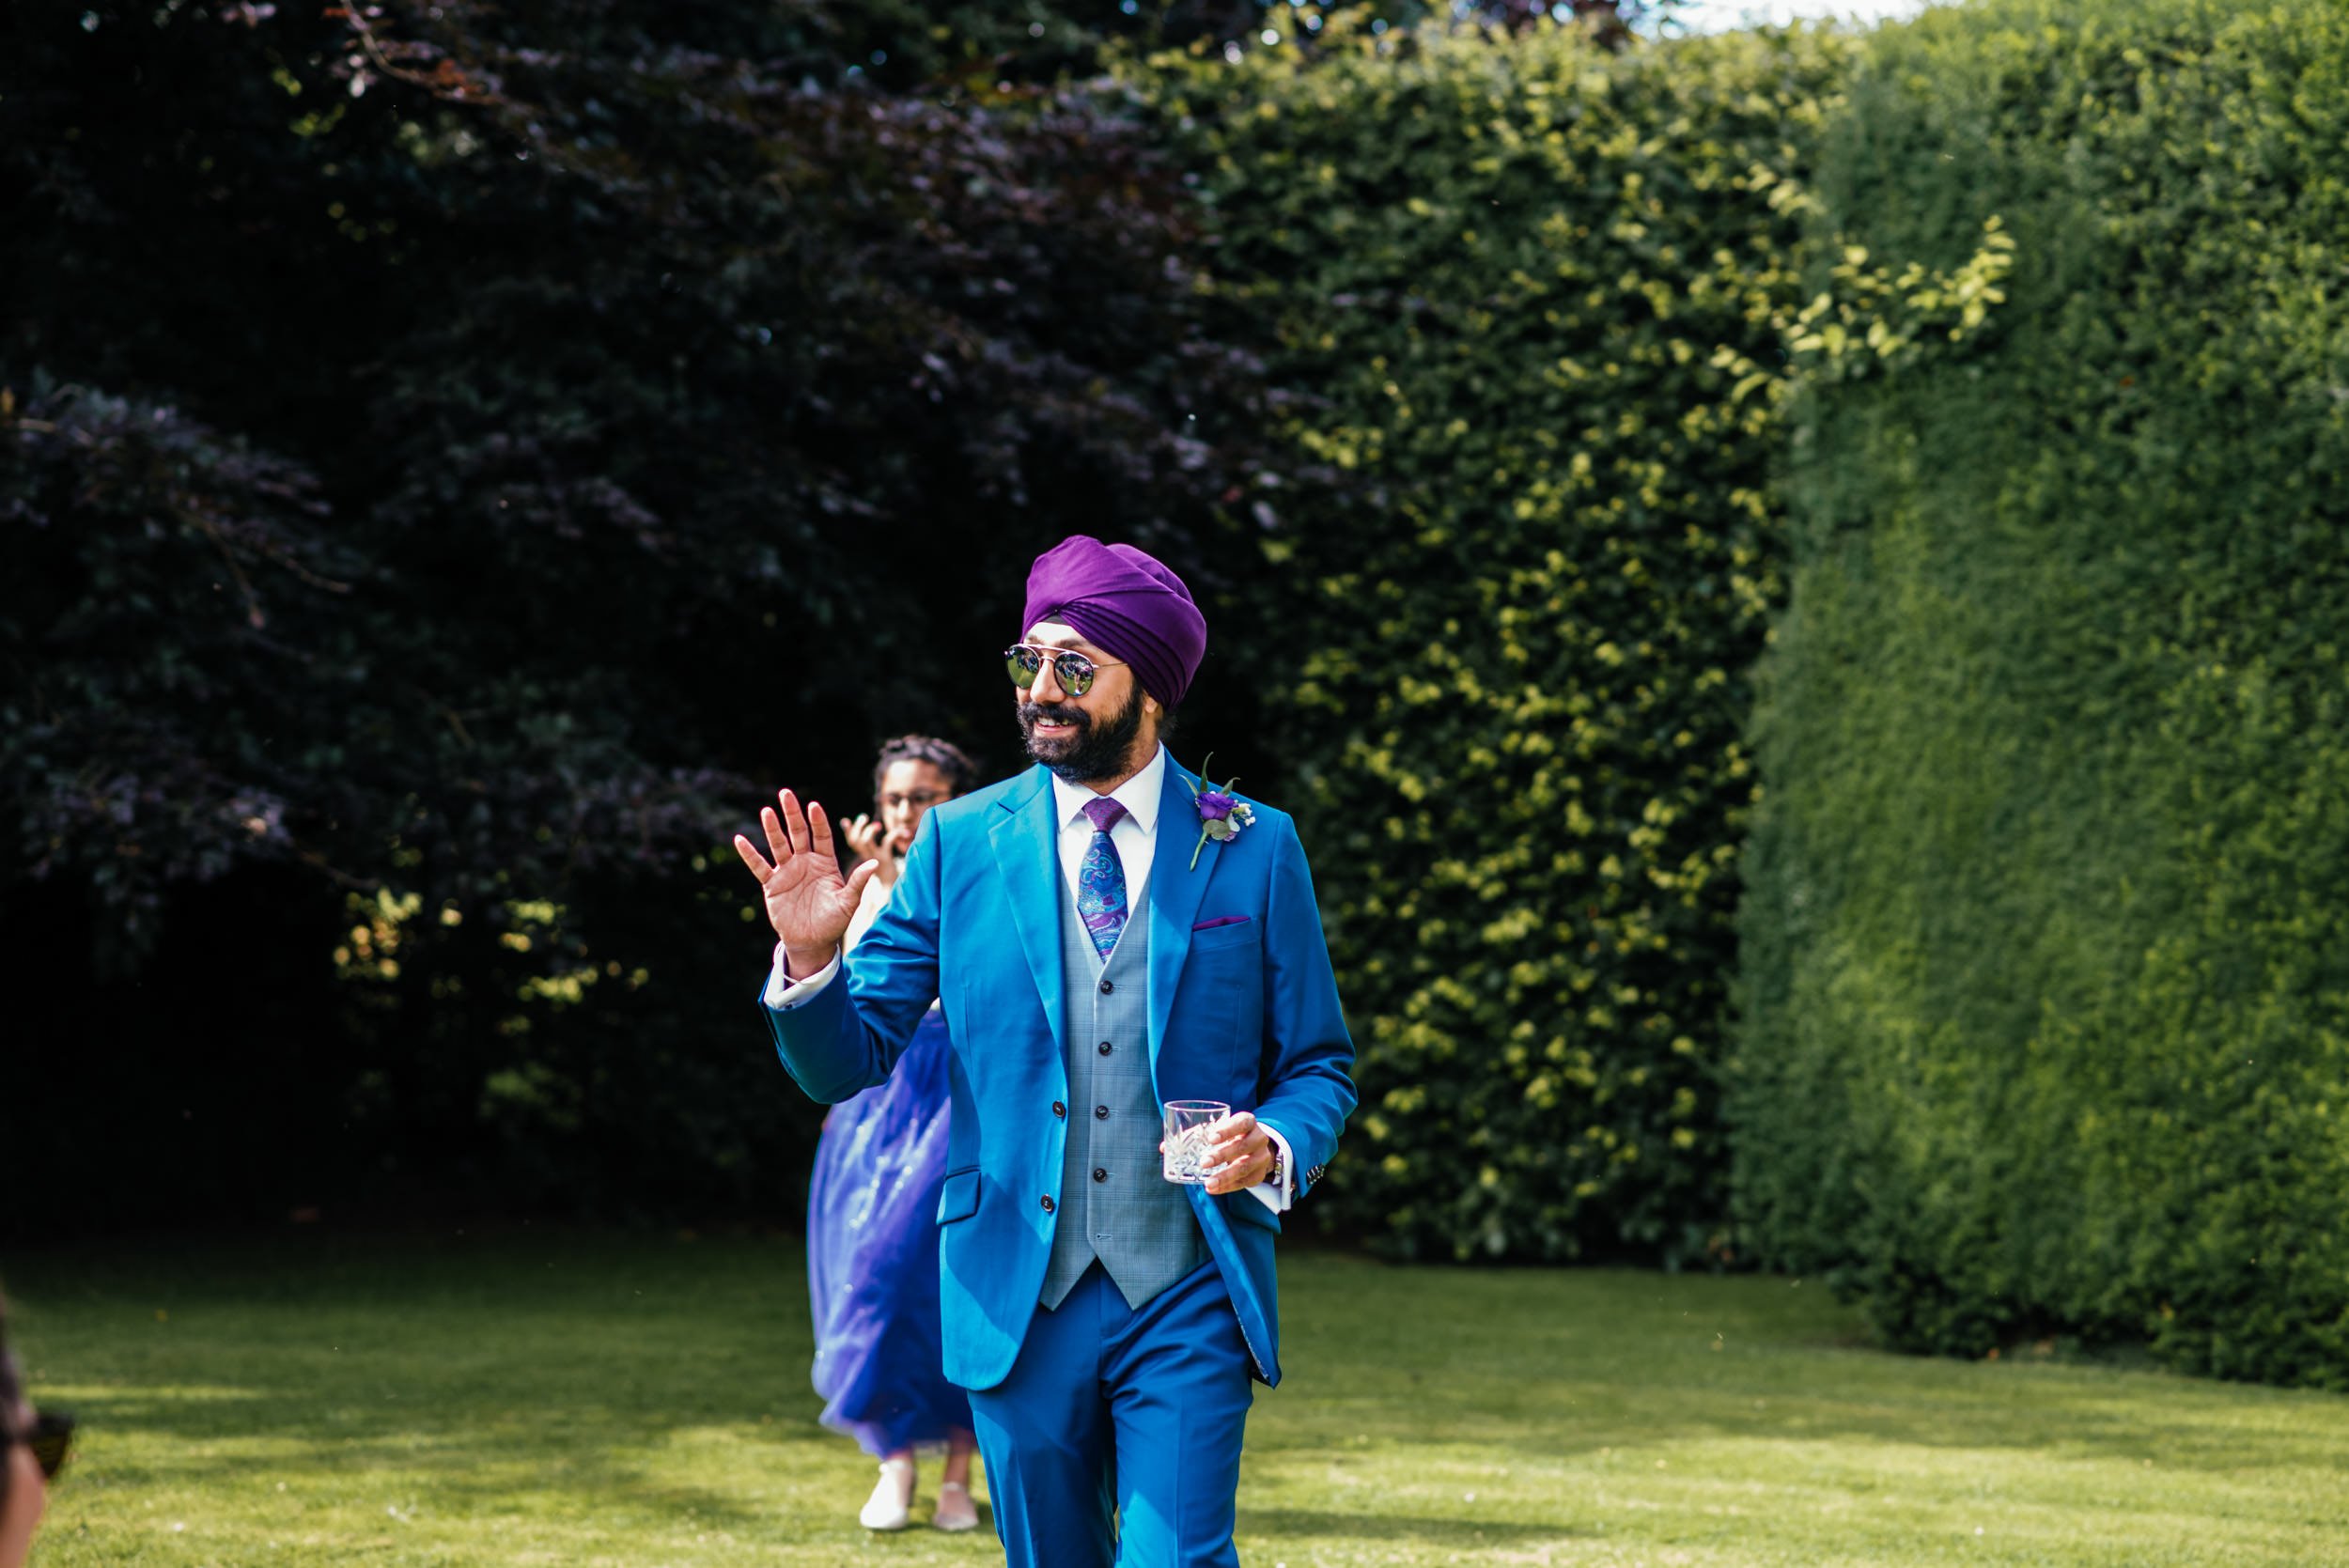 groom arriving at the outdoor ceremony